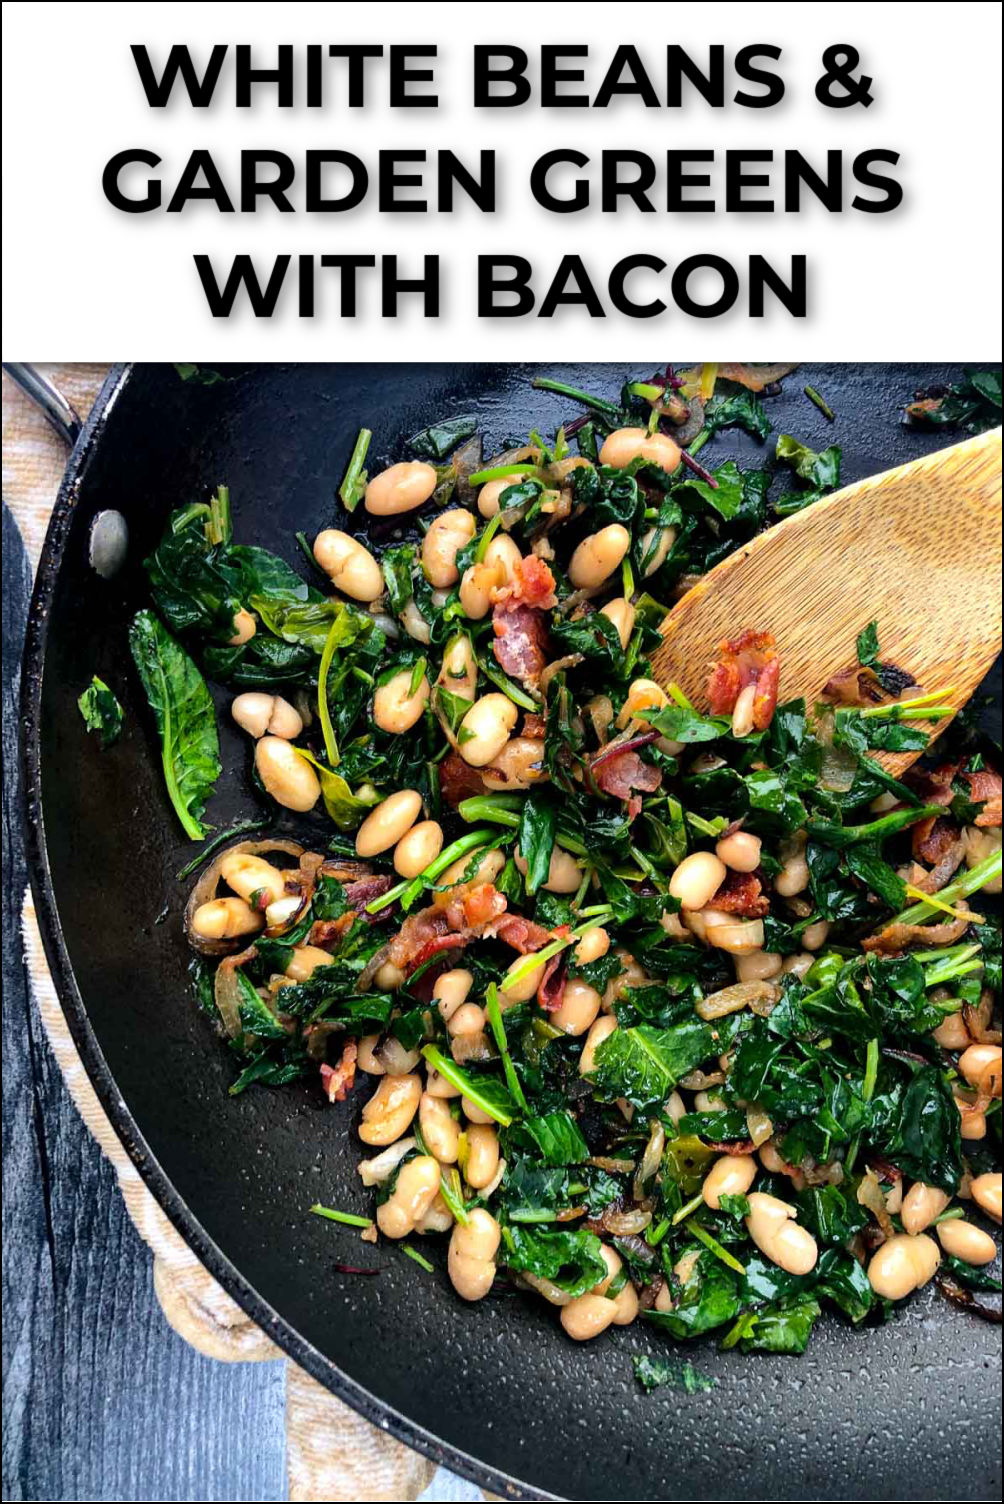 closeup of pan with white beans and greens with bacon with text